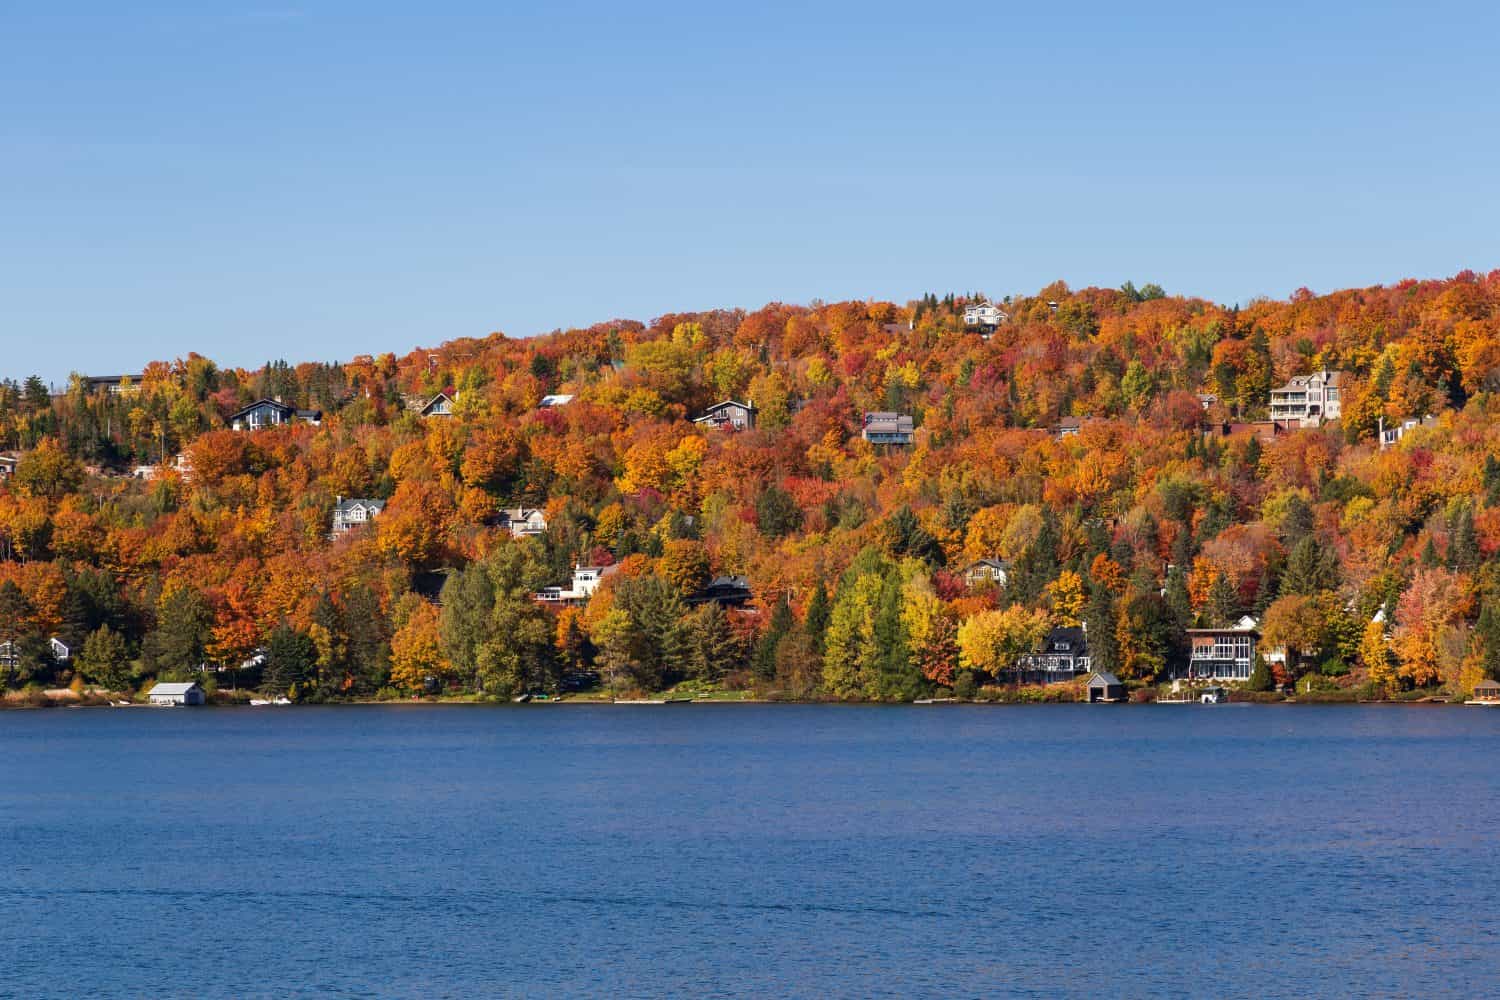 Houses nestled in colourful fall foliage on the side of a mountain overlooking a lake, Lac-Beauport, Quebec, Canada